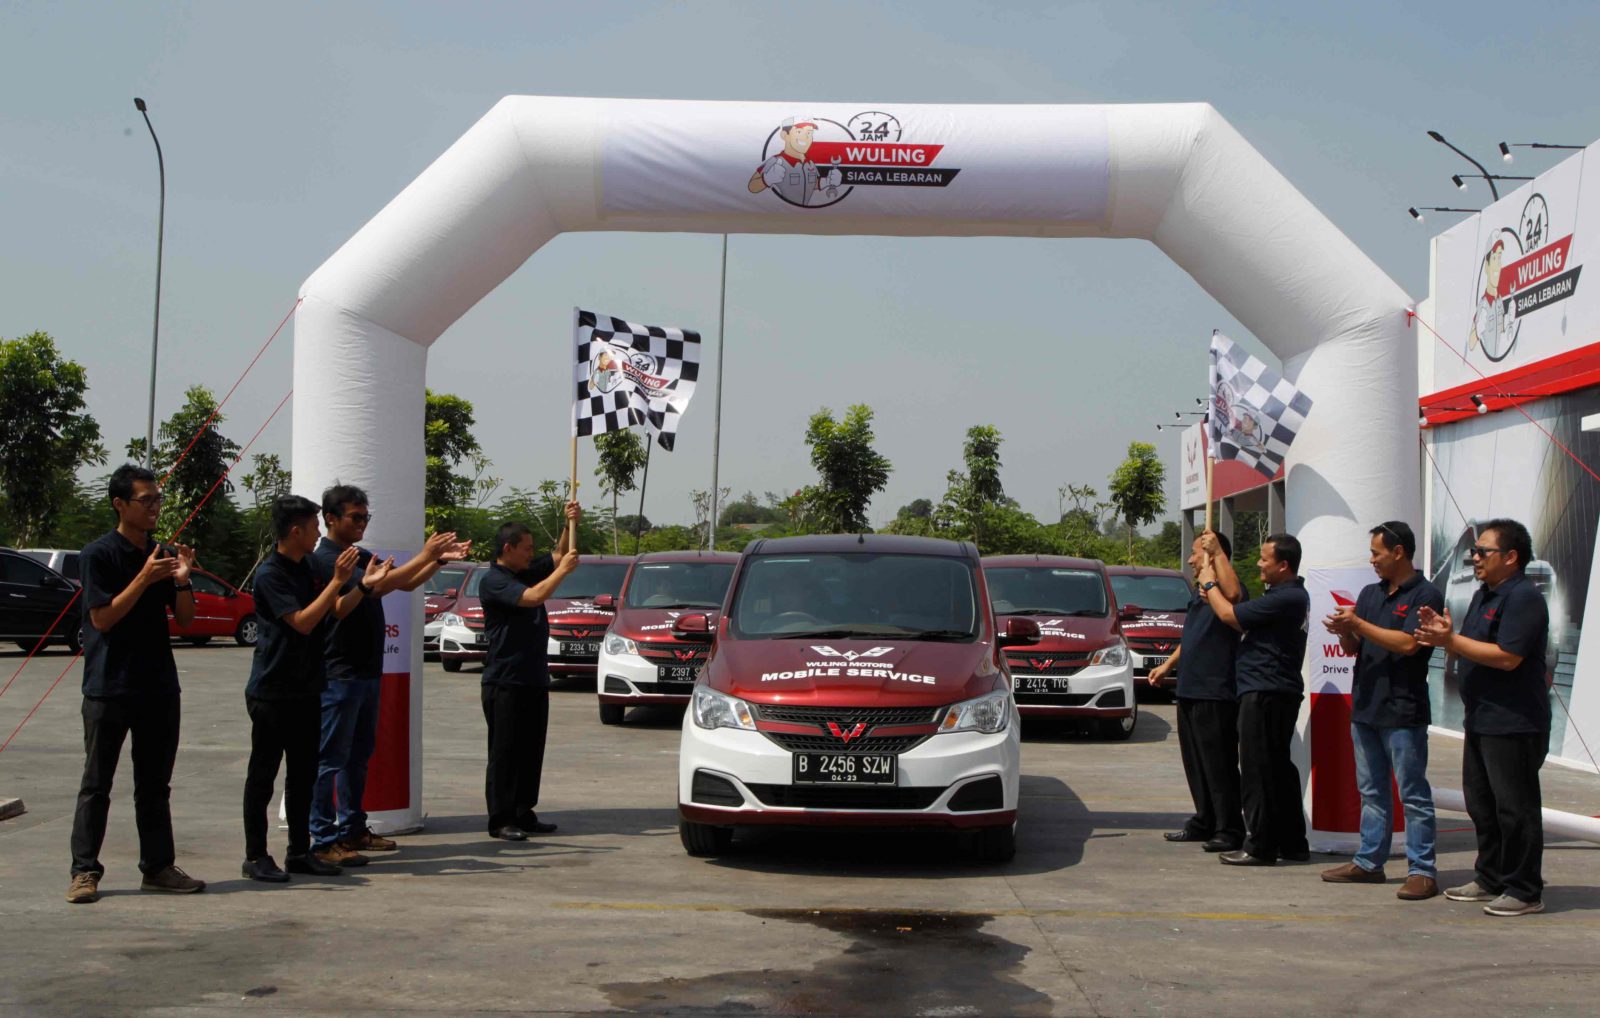 Image Wuling Begins to Operate 38 Wuling Siaga Lebaran Service Points